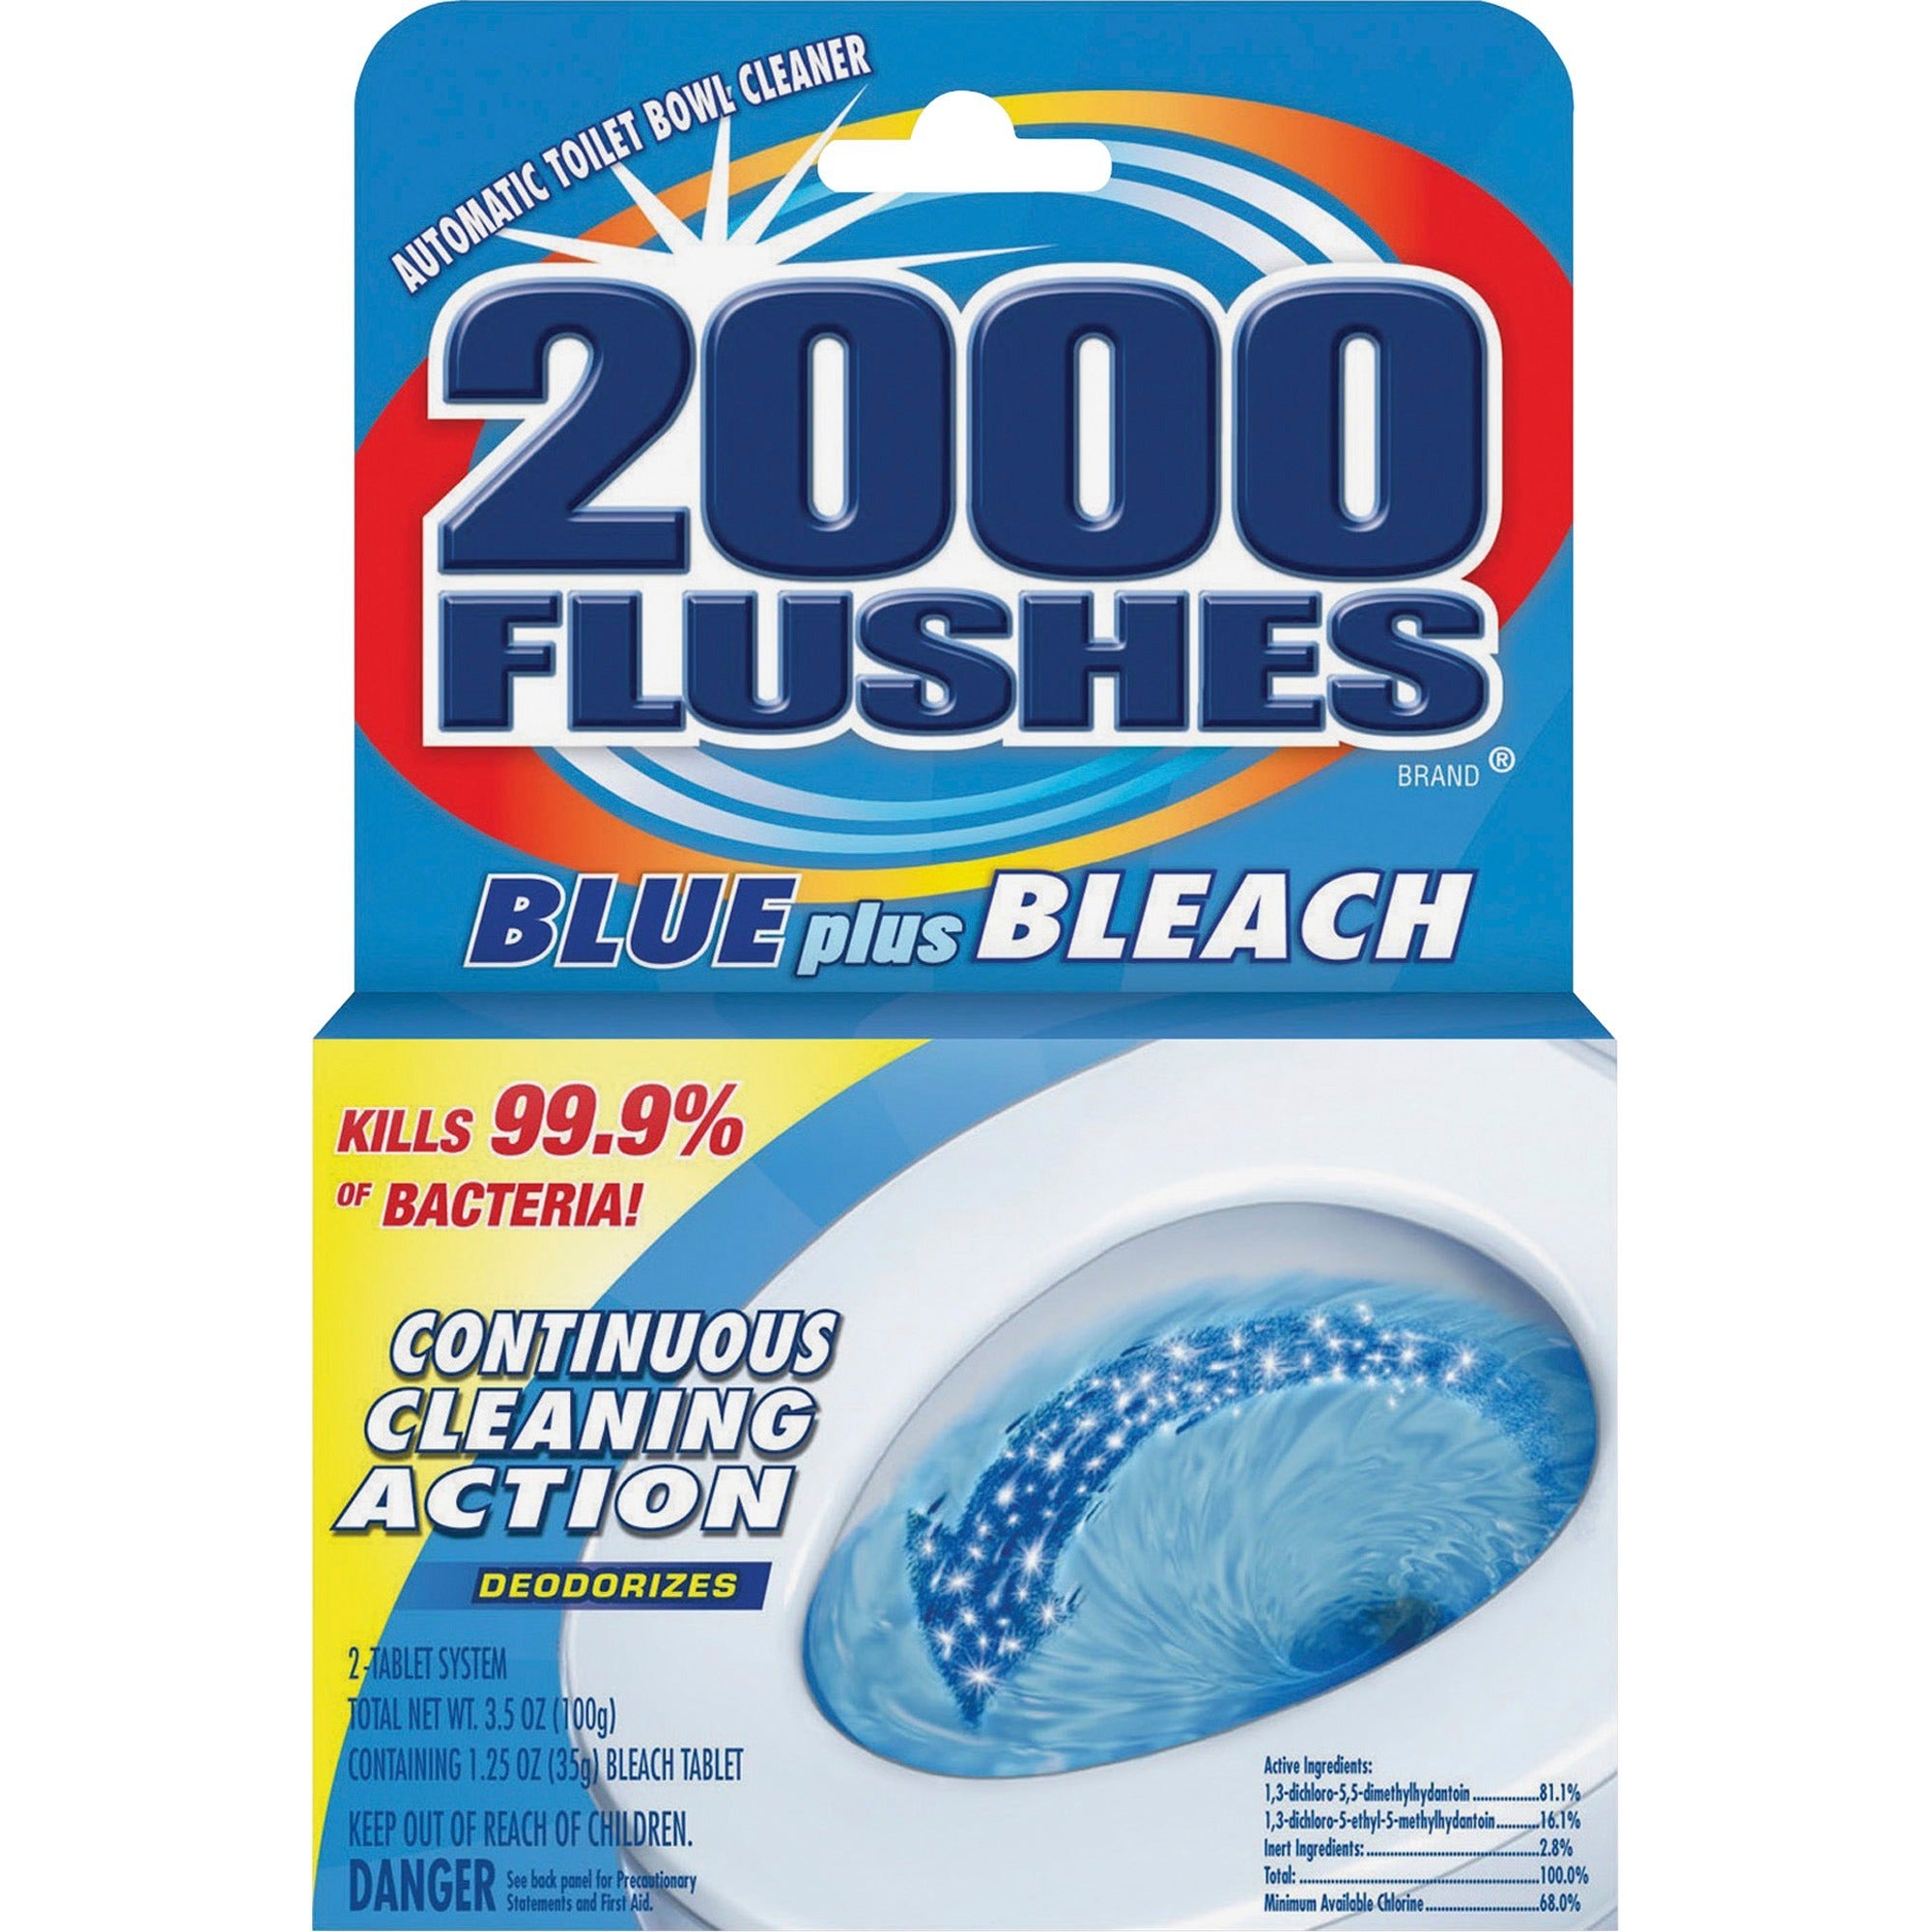 wd-40-2000-flushes-blue-bleach-bowl-cleaner-tablets-concentrate-350-oz-022-lb-12-carton-antibacterial-deodorant-blue_wdf208017ct - 2